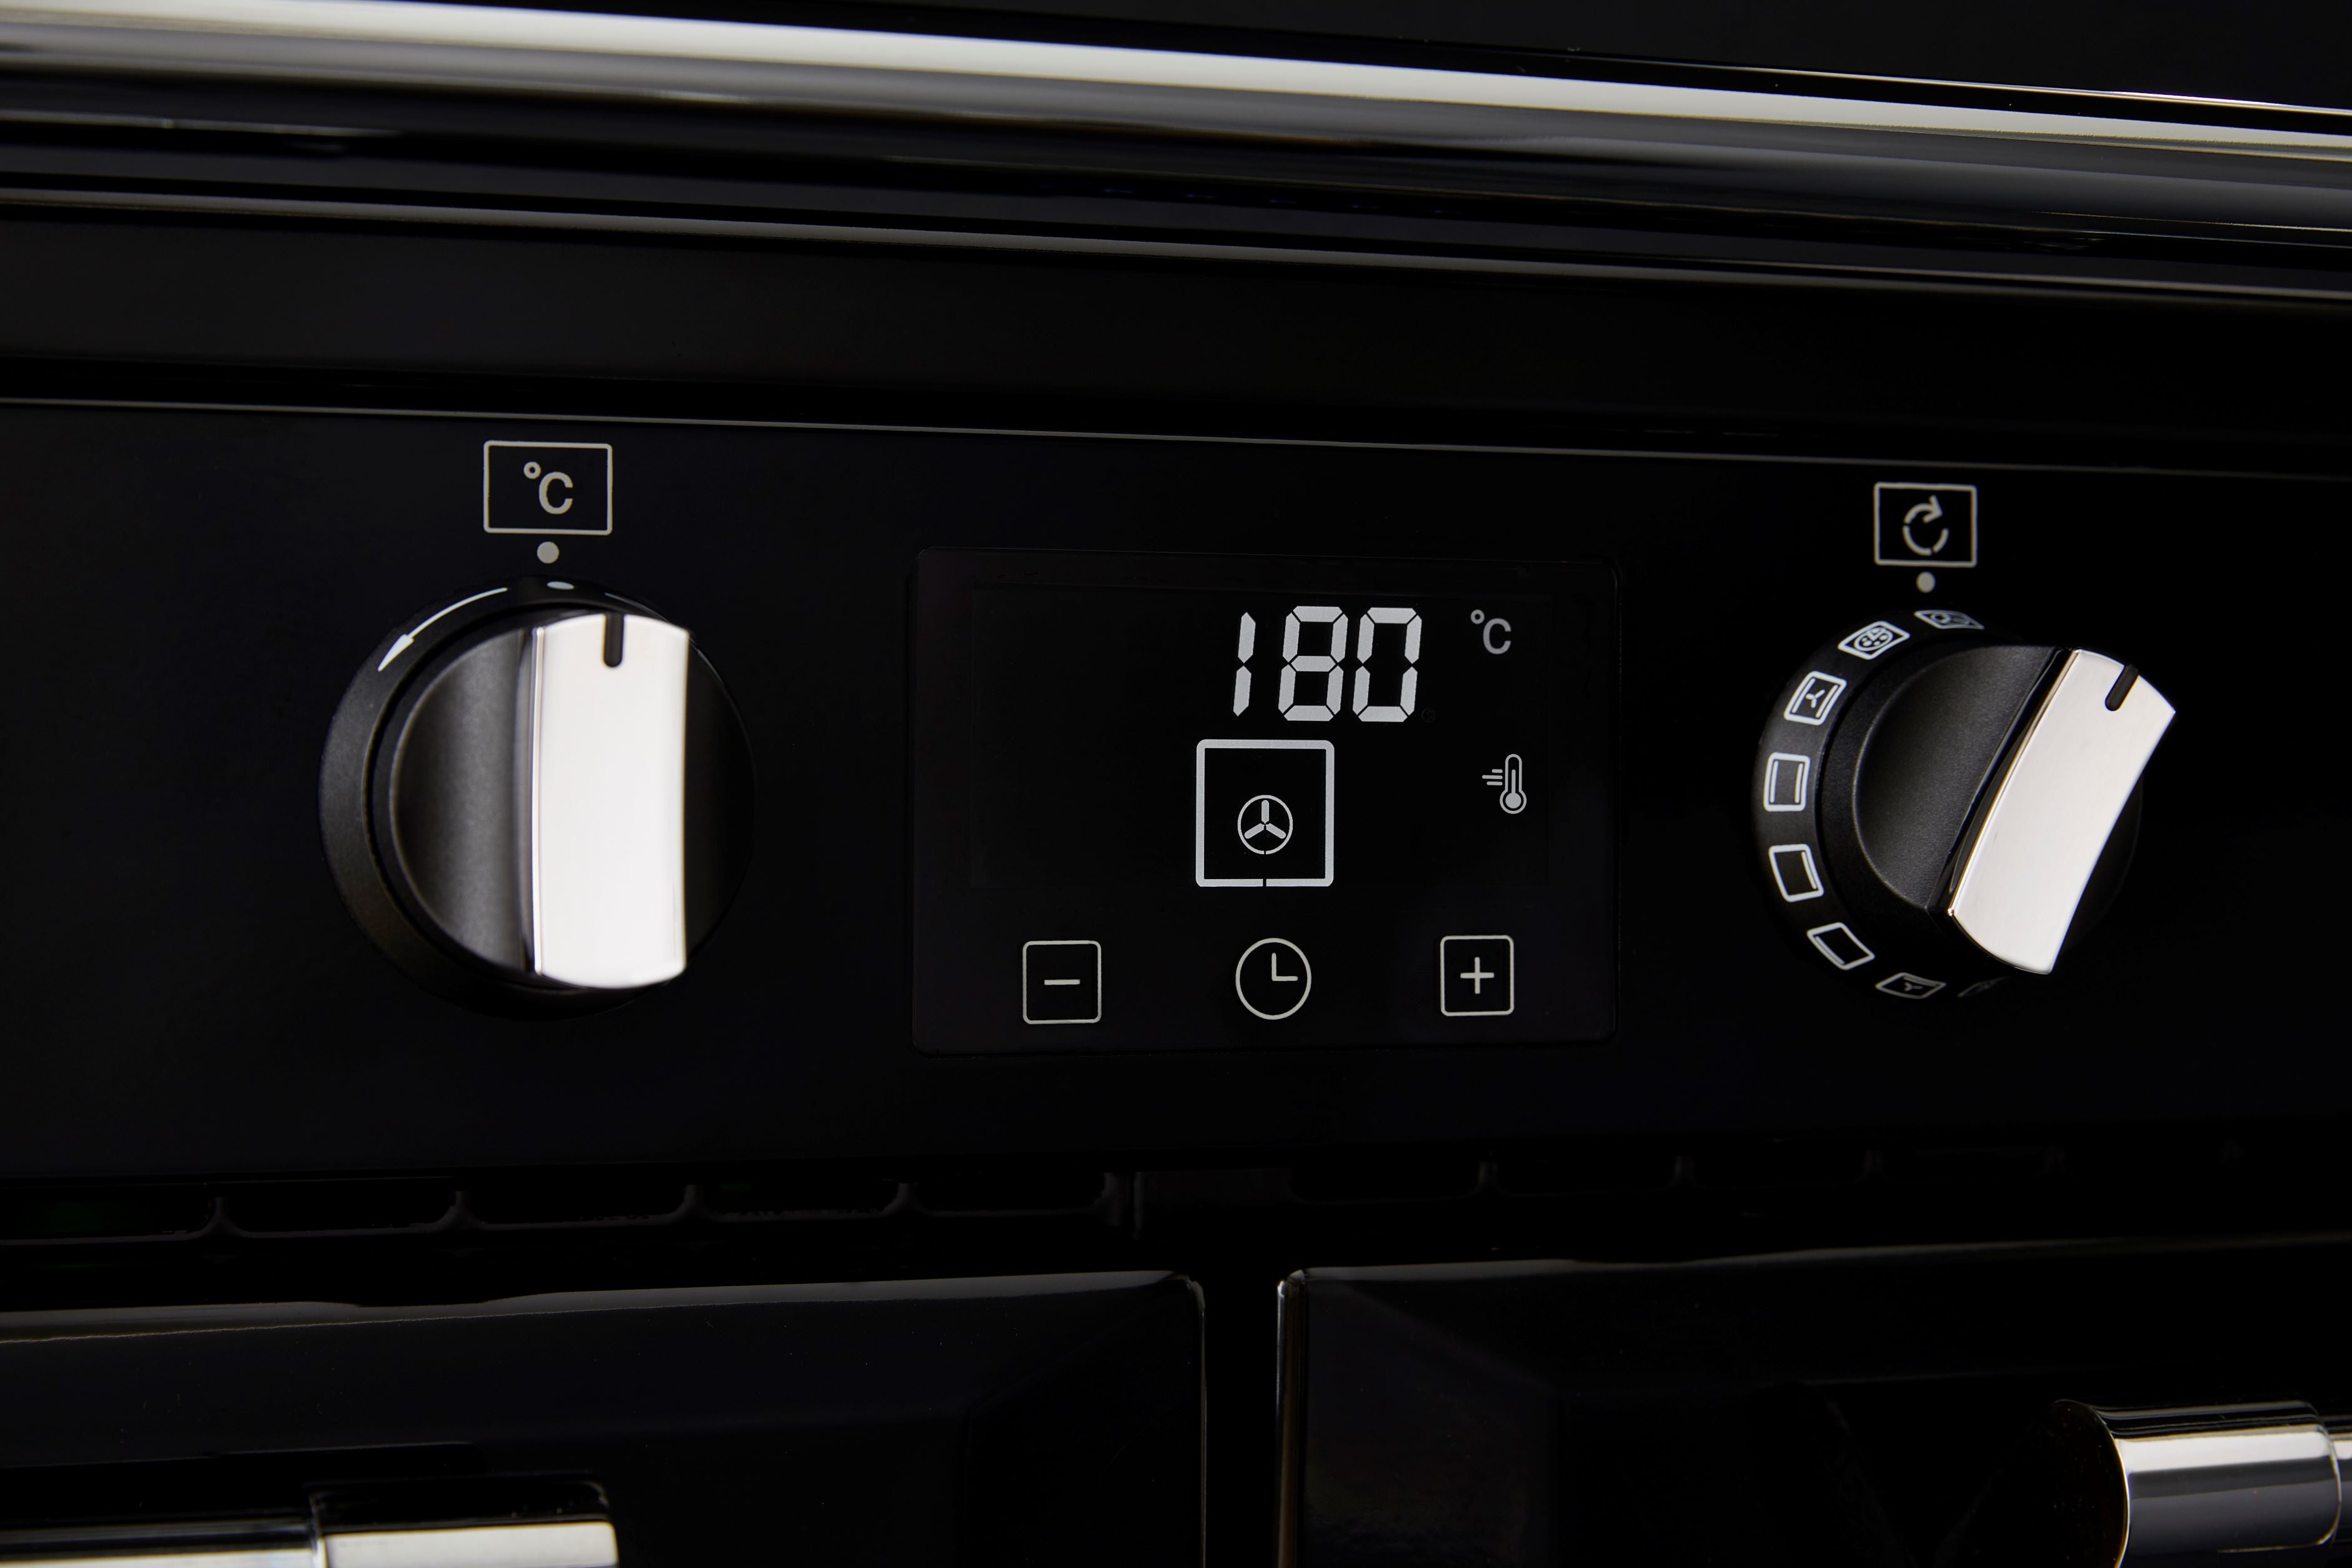 11 SETTING MULTIFUNCTION OVEN WITH EQUIFLOW™ FAN